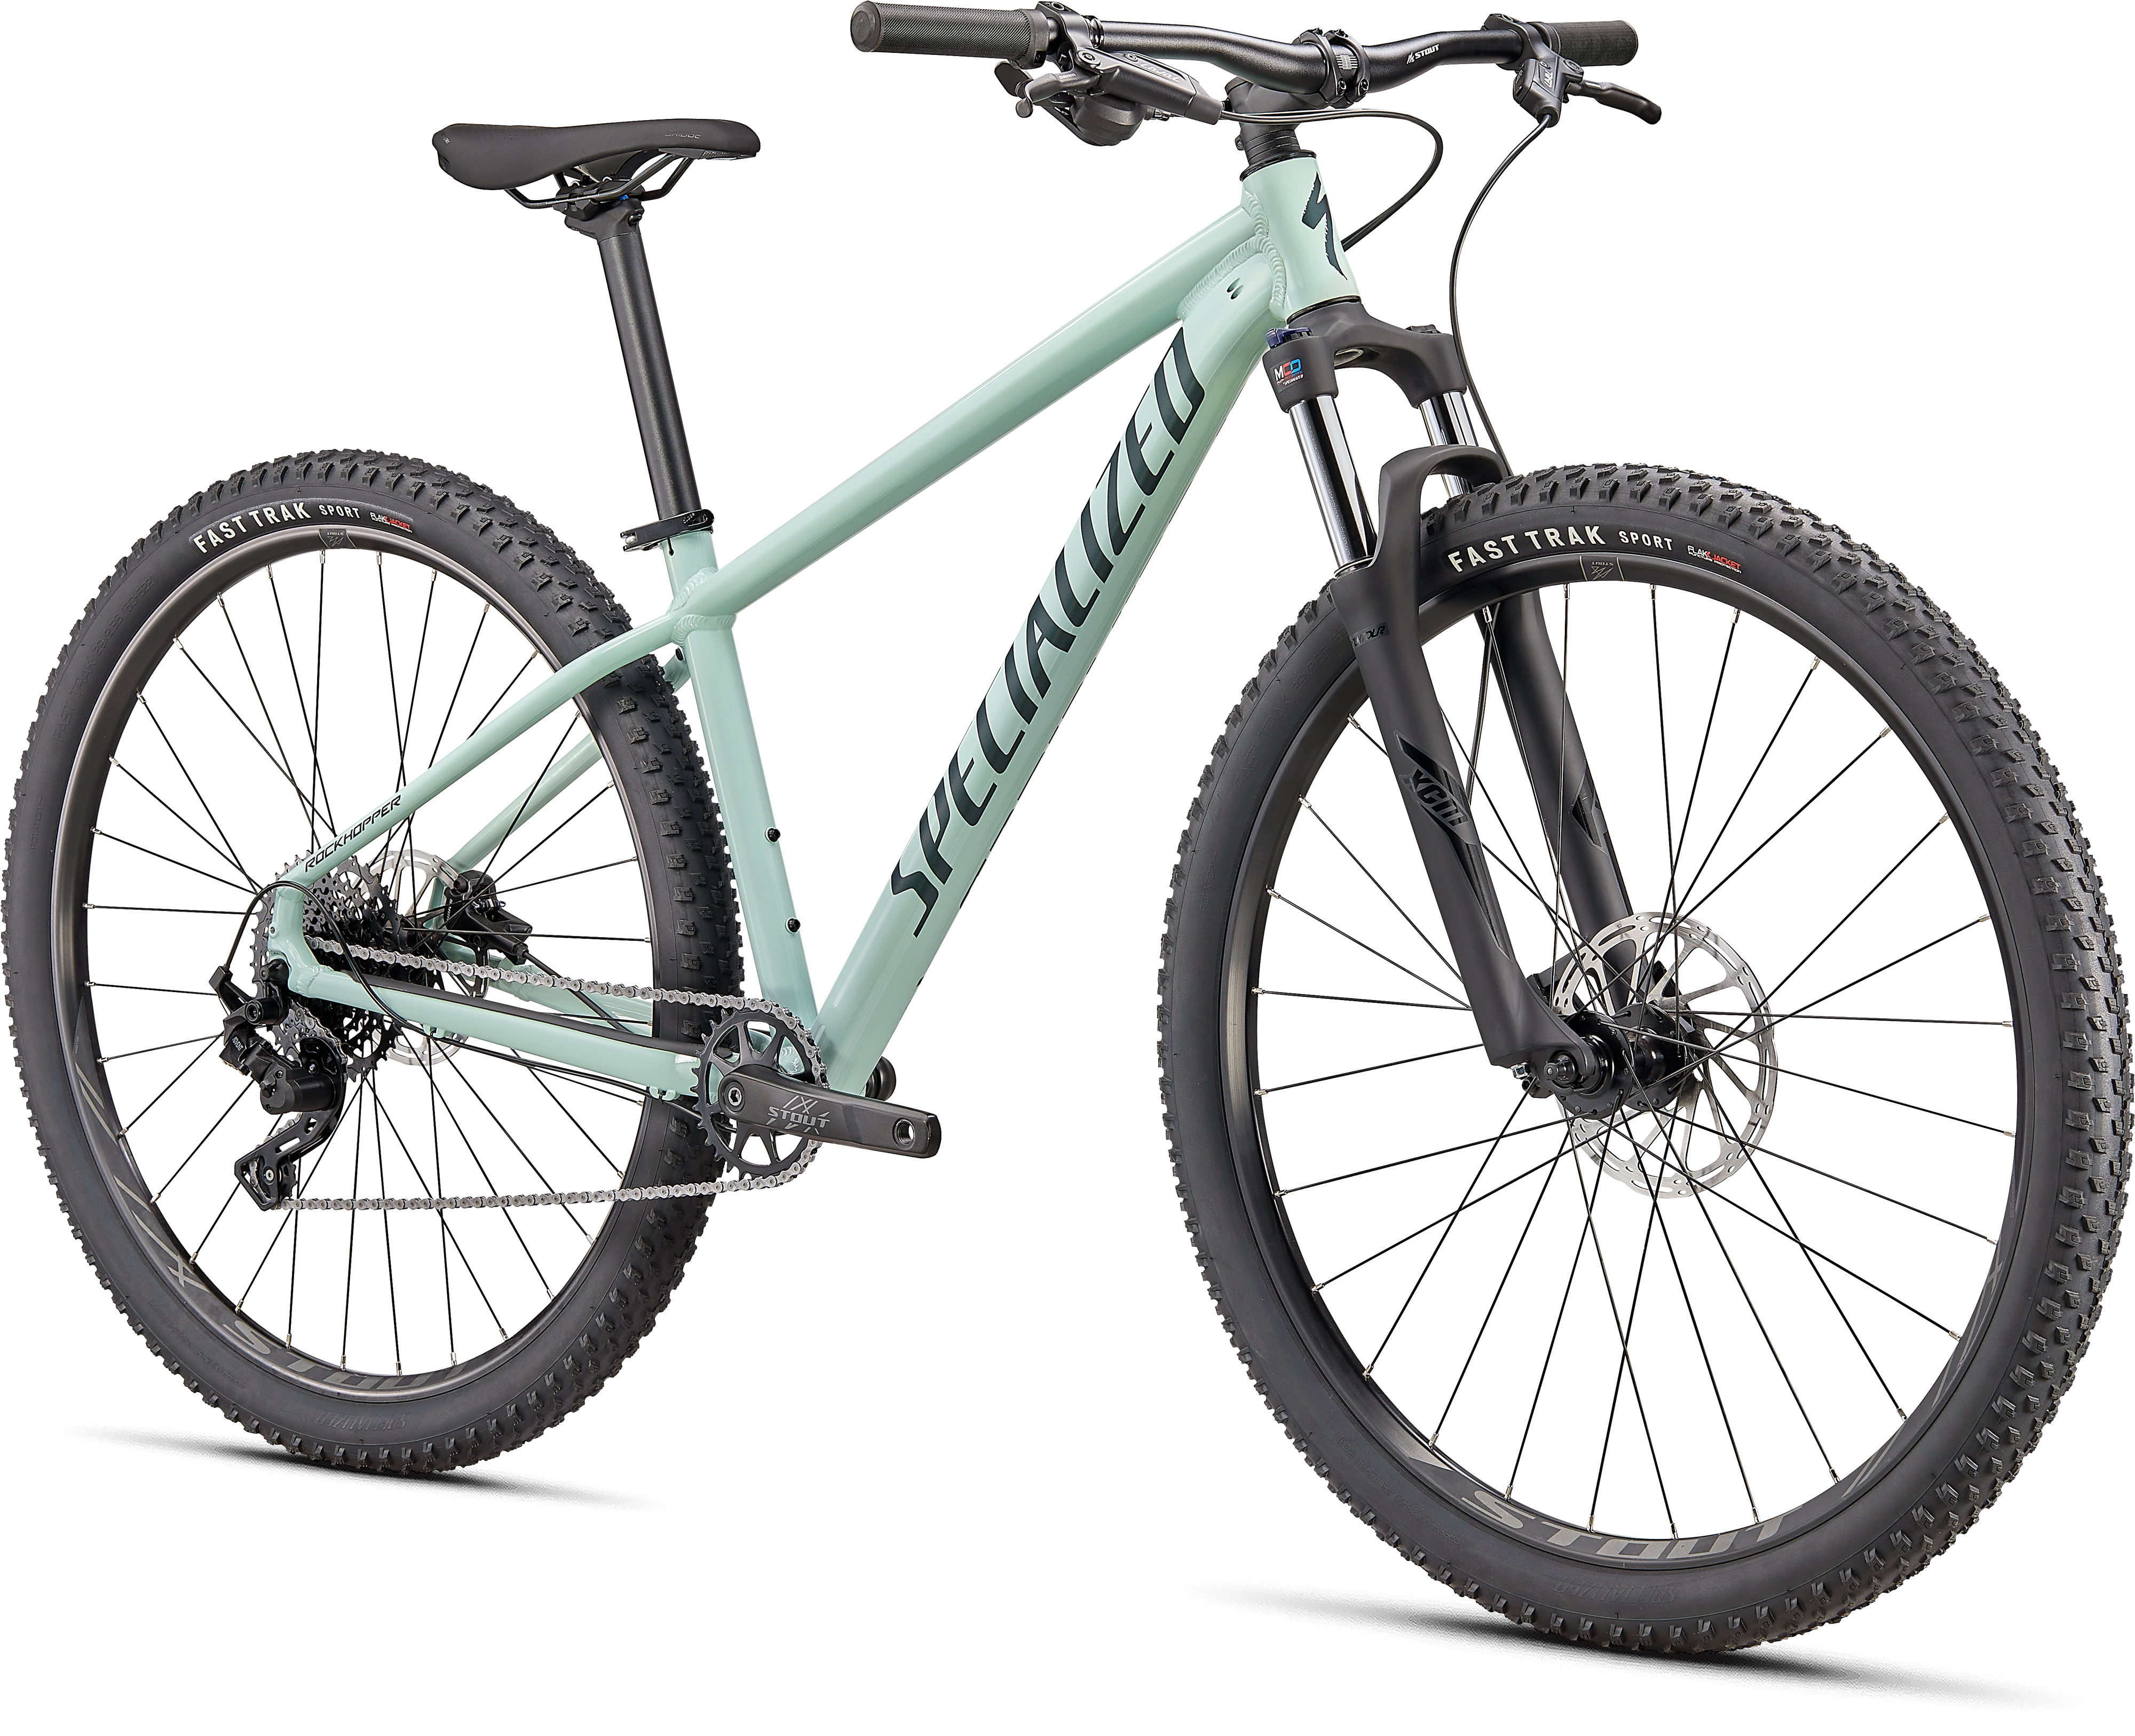 SPECIALIZED ROCKHOPPER SPORT 29 スペシャライズド ロックホッパー 